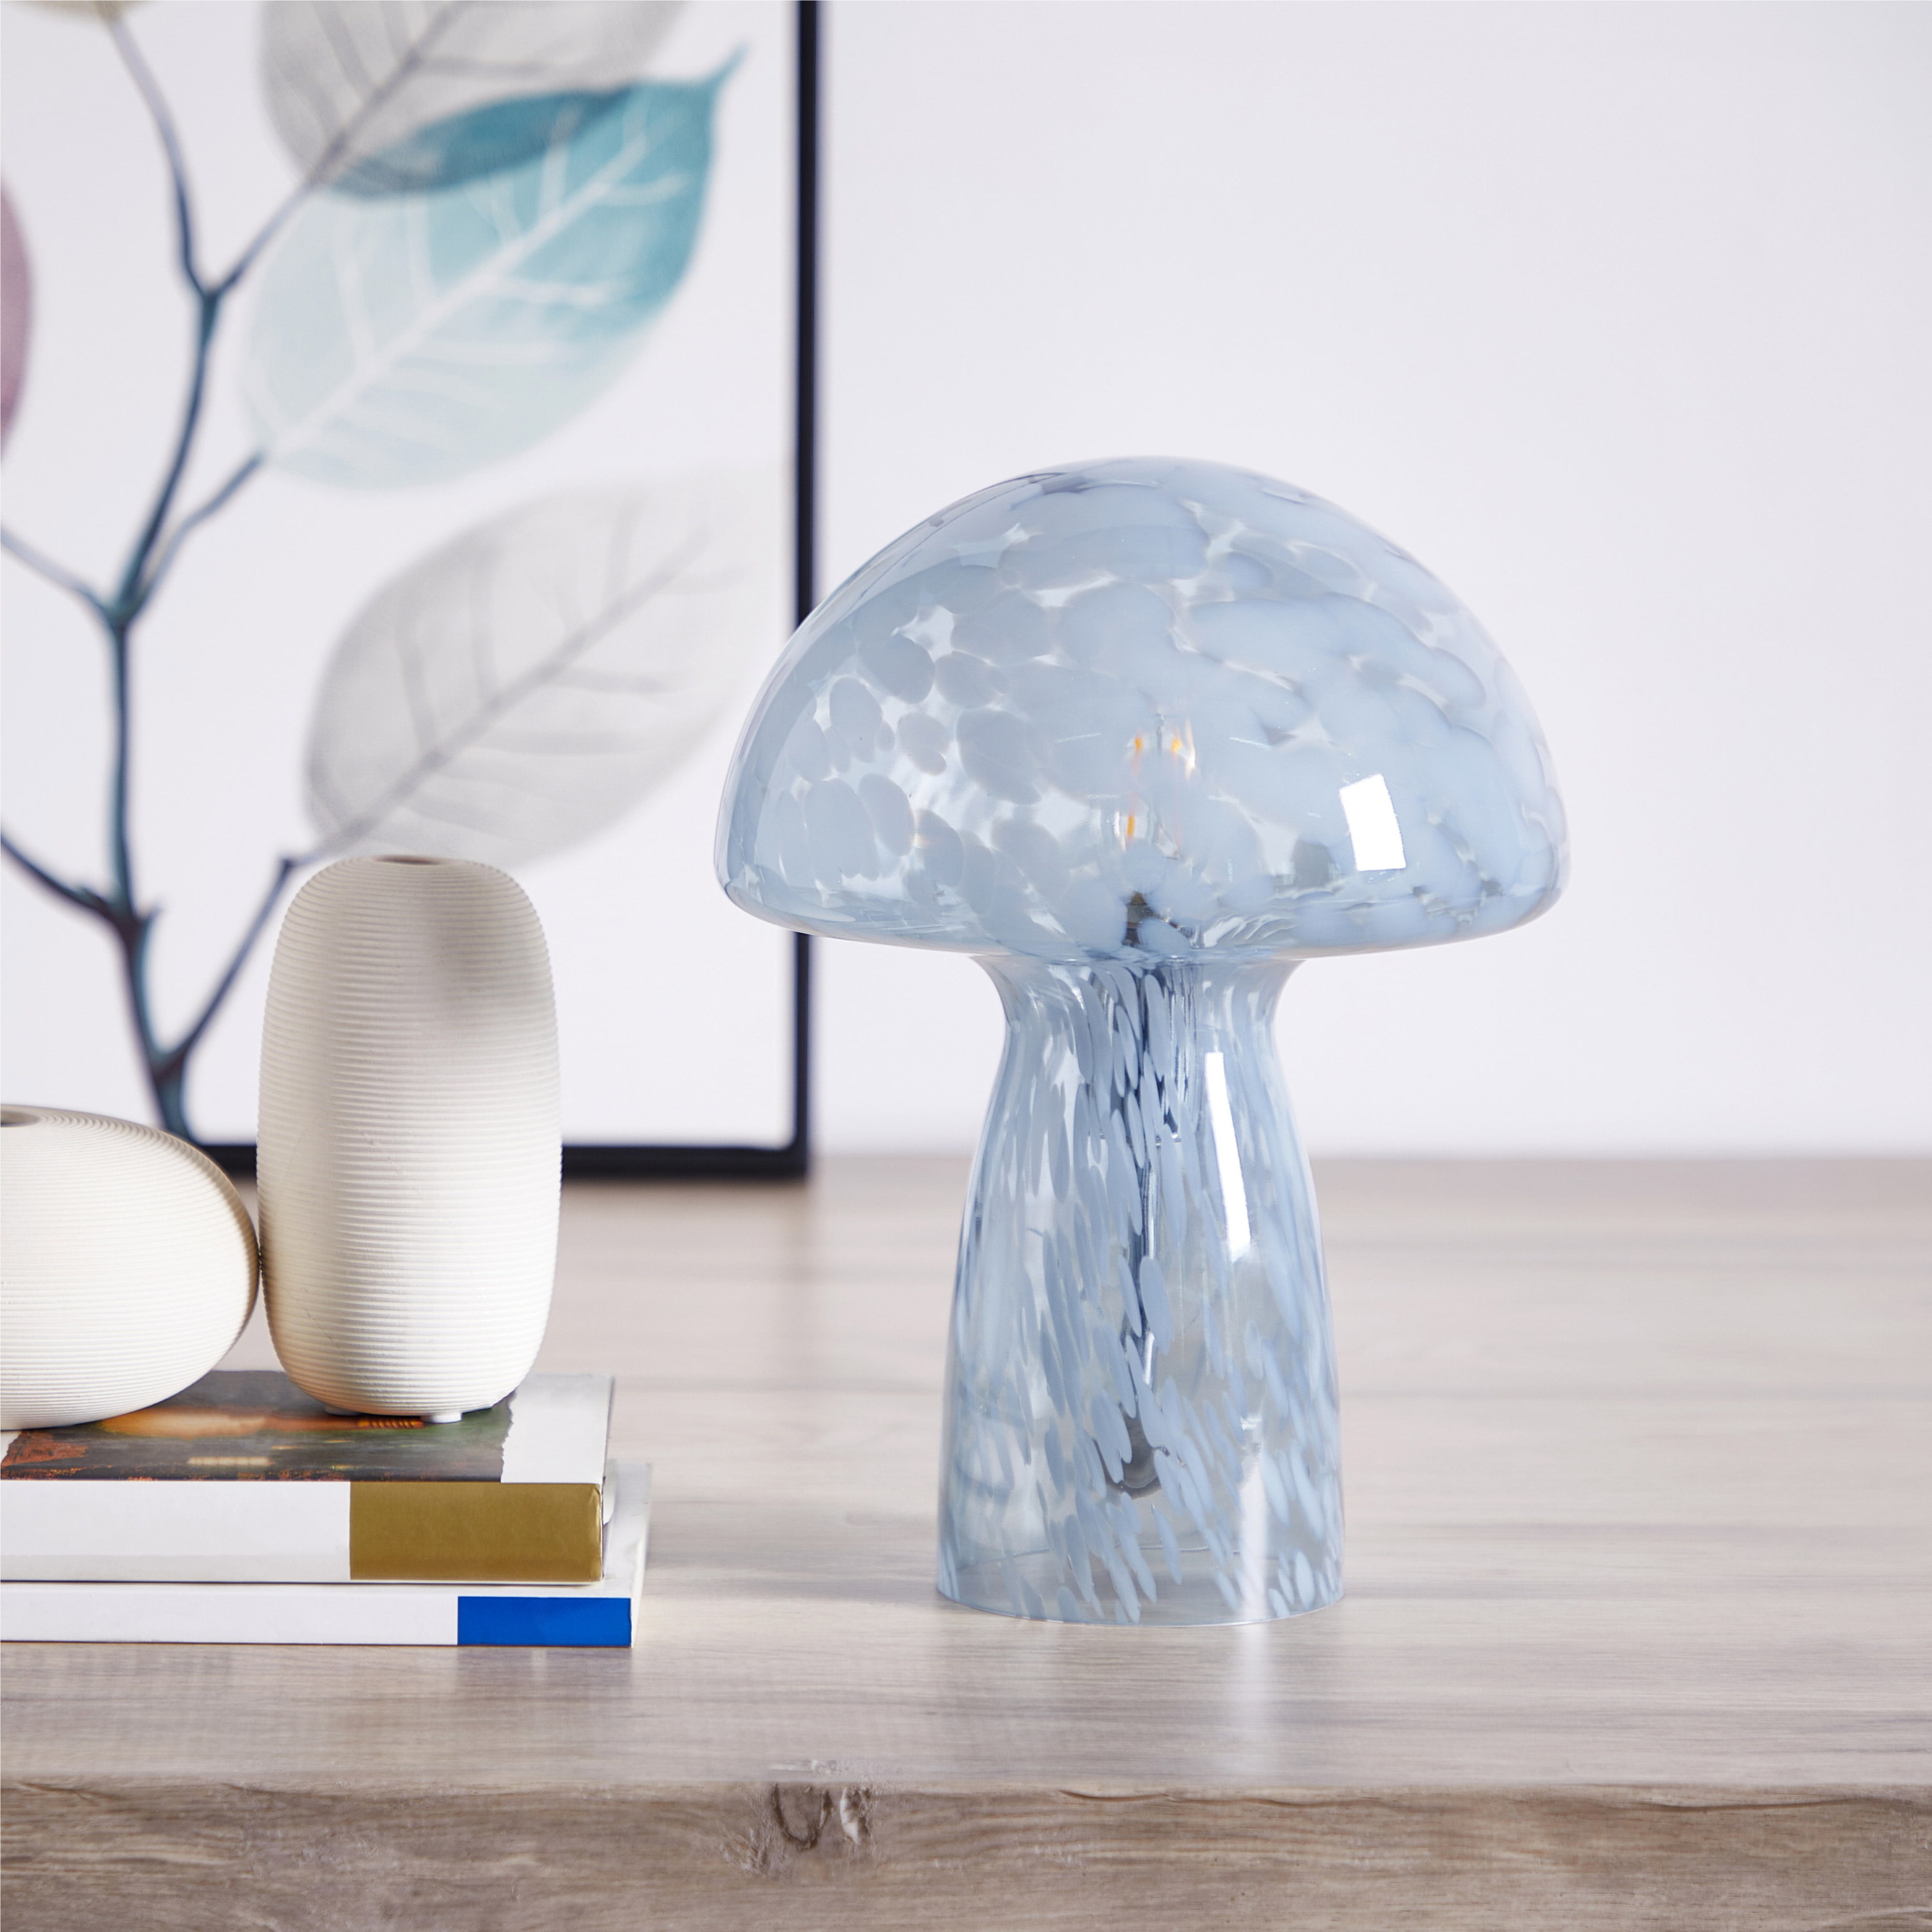 the glass mushroom lamp in a clear blue